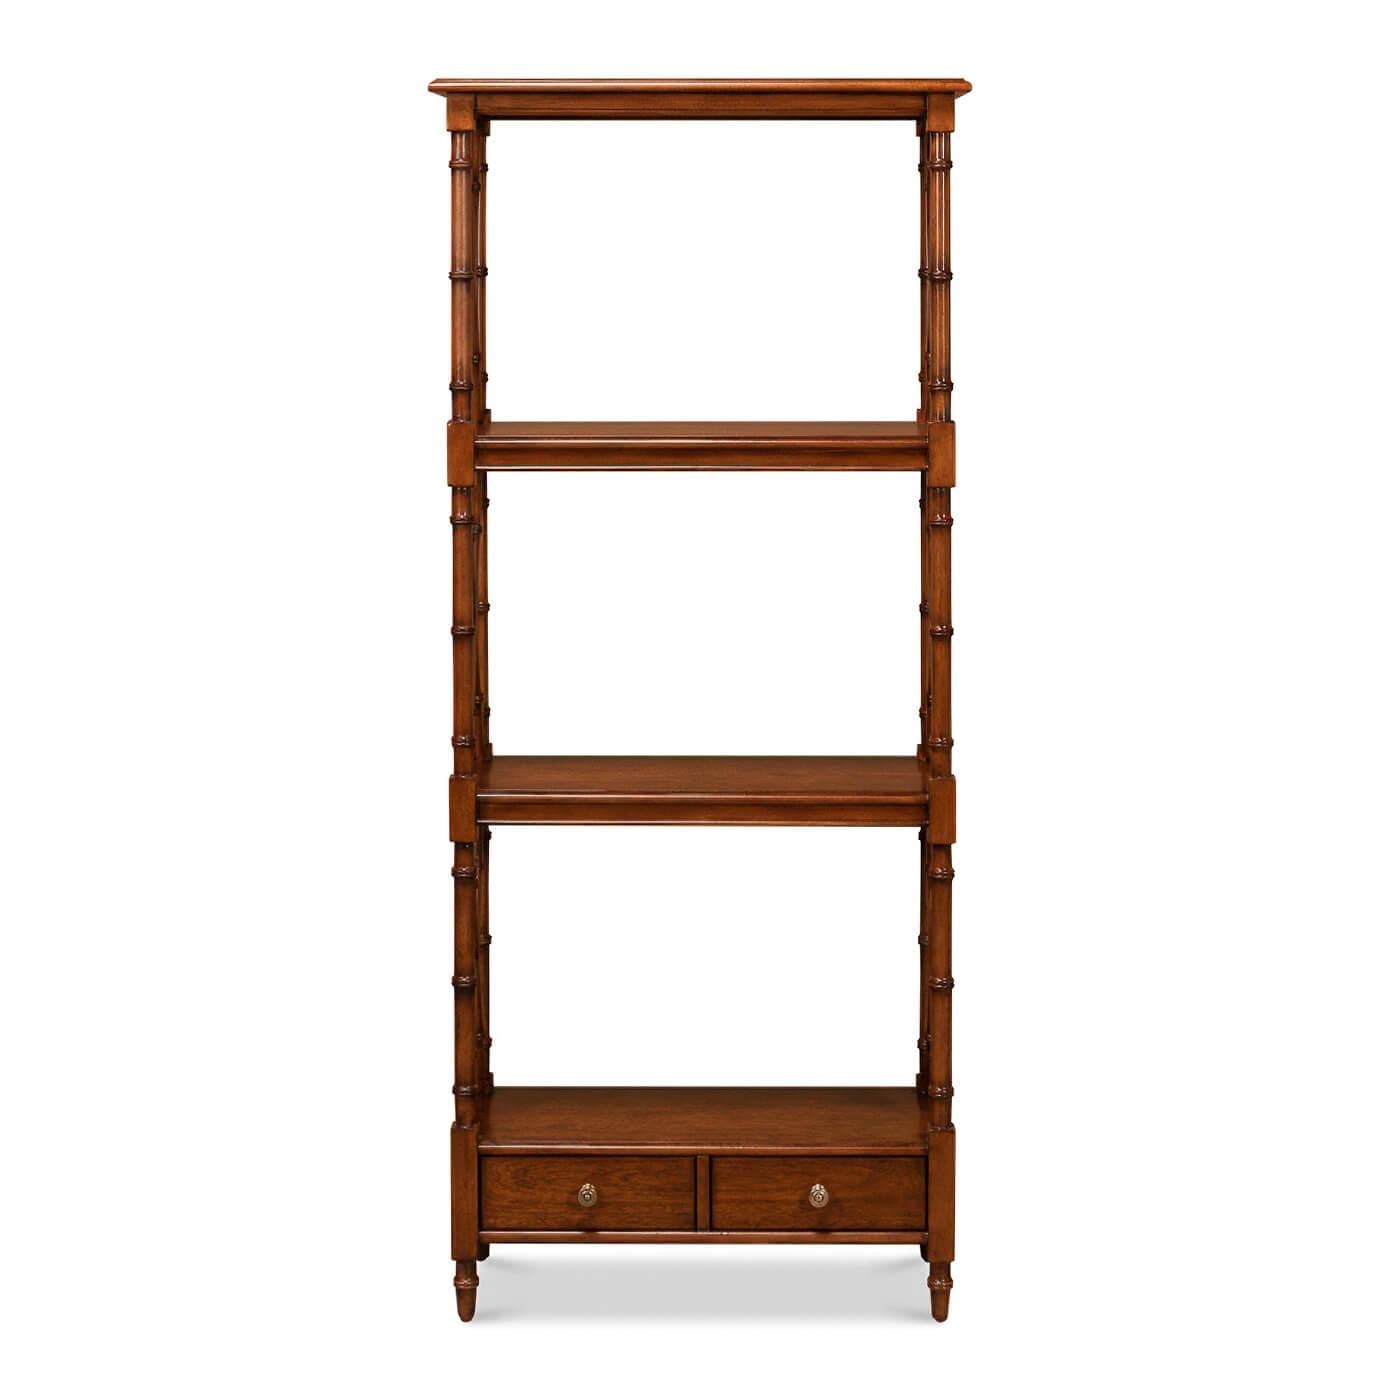 A regency-style bamboo etagere crafted from walnut and given our dark-aged tobacco finish. It includes fixed shelves and two drawers for storage. 

Dimensions:
25 in. W x 11 in. D x 58 in. H.
 